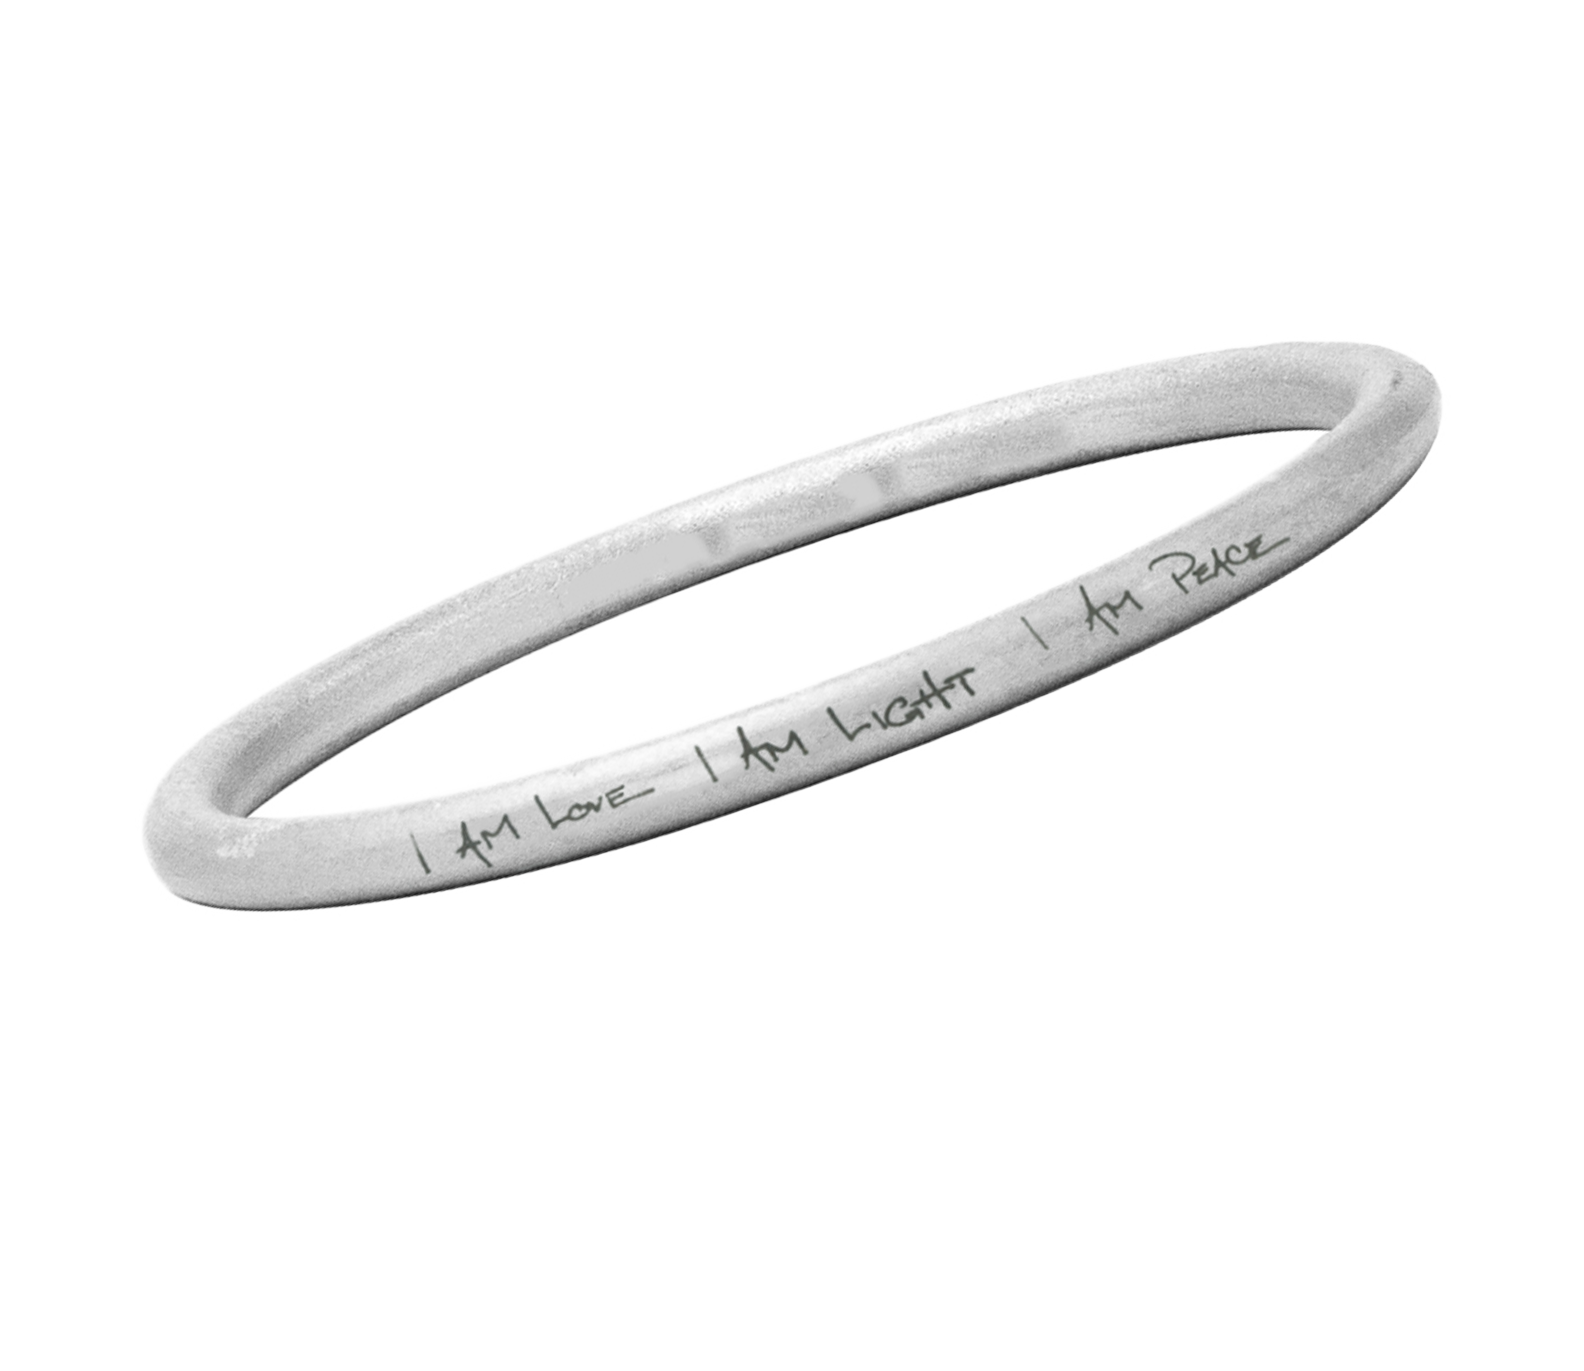 Mantra Bangles - Sterling Silver - Sustainable & Ethical Laotian Jewelry